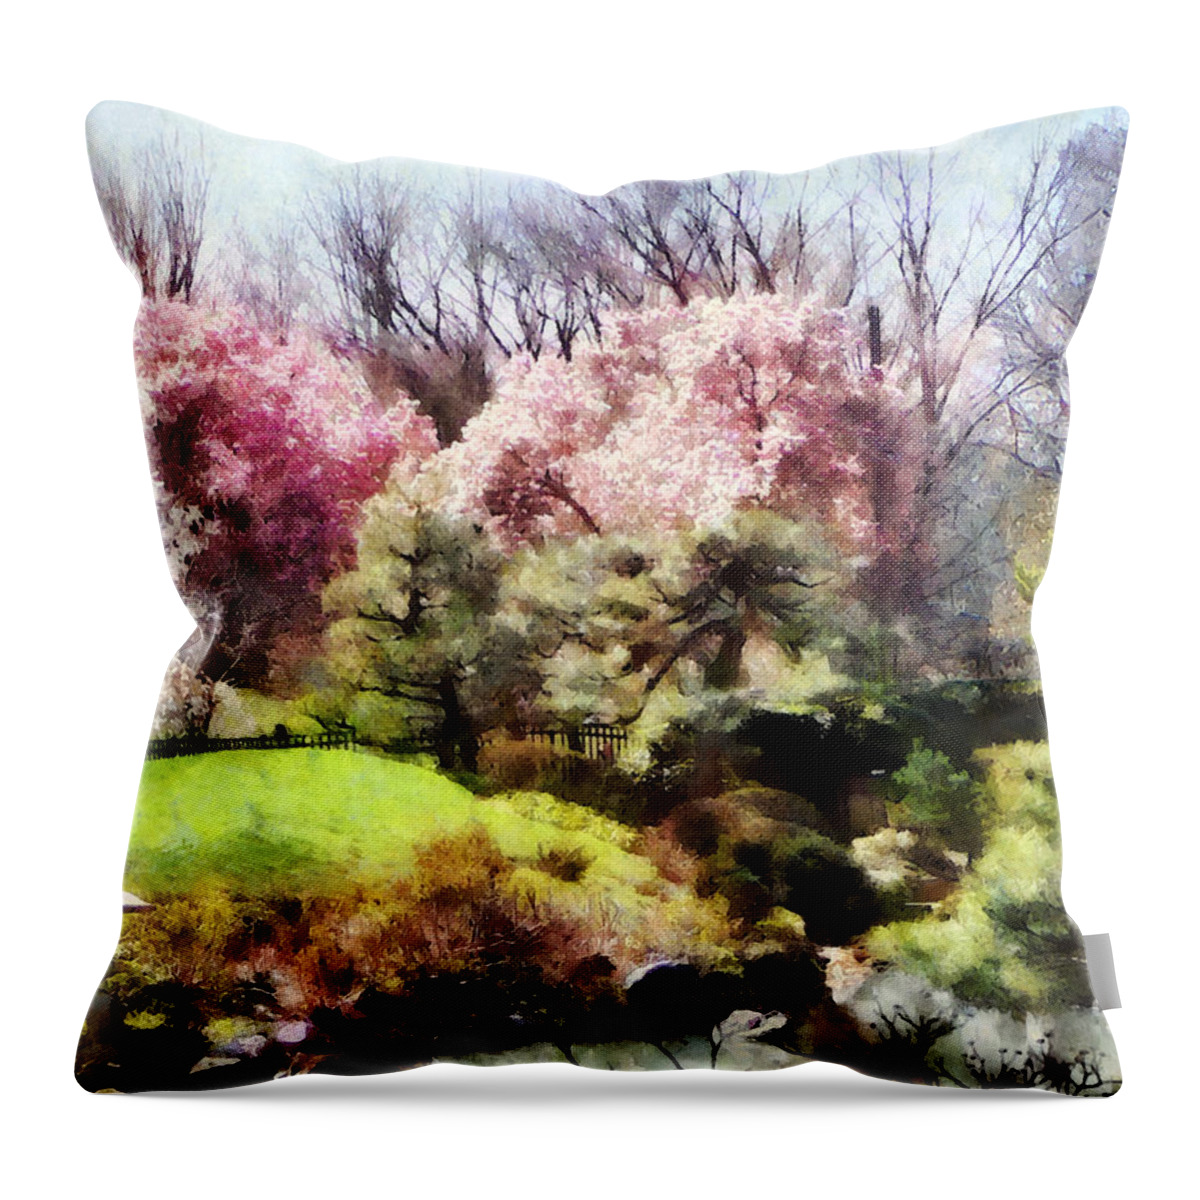 Japanese Garden Throw Pillow featuring the photograph Japanese Spring by Susan Savad